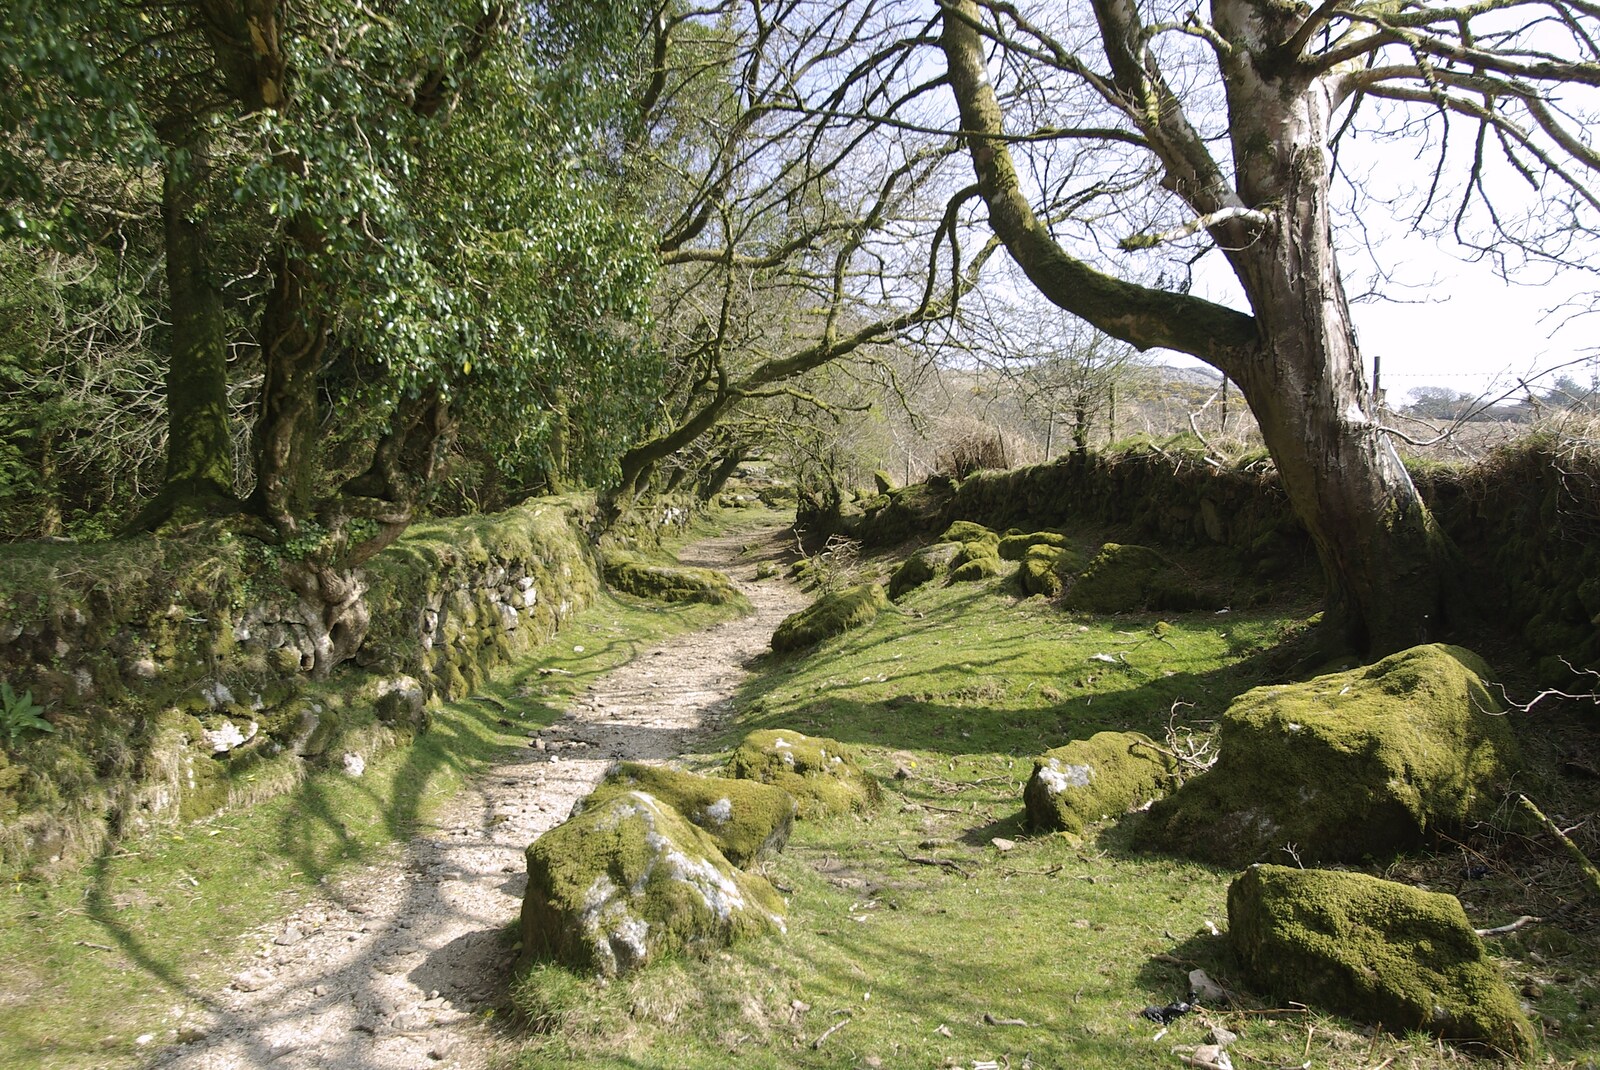 The path to Sheepstor from A Walk up Sheepstor and Visiting Sis and Matt, Dartmoor and Chagford, Devon - 9th April 2007